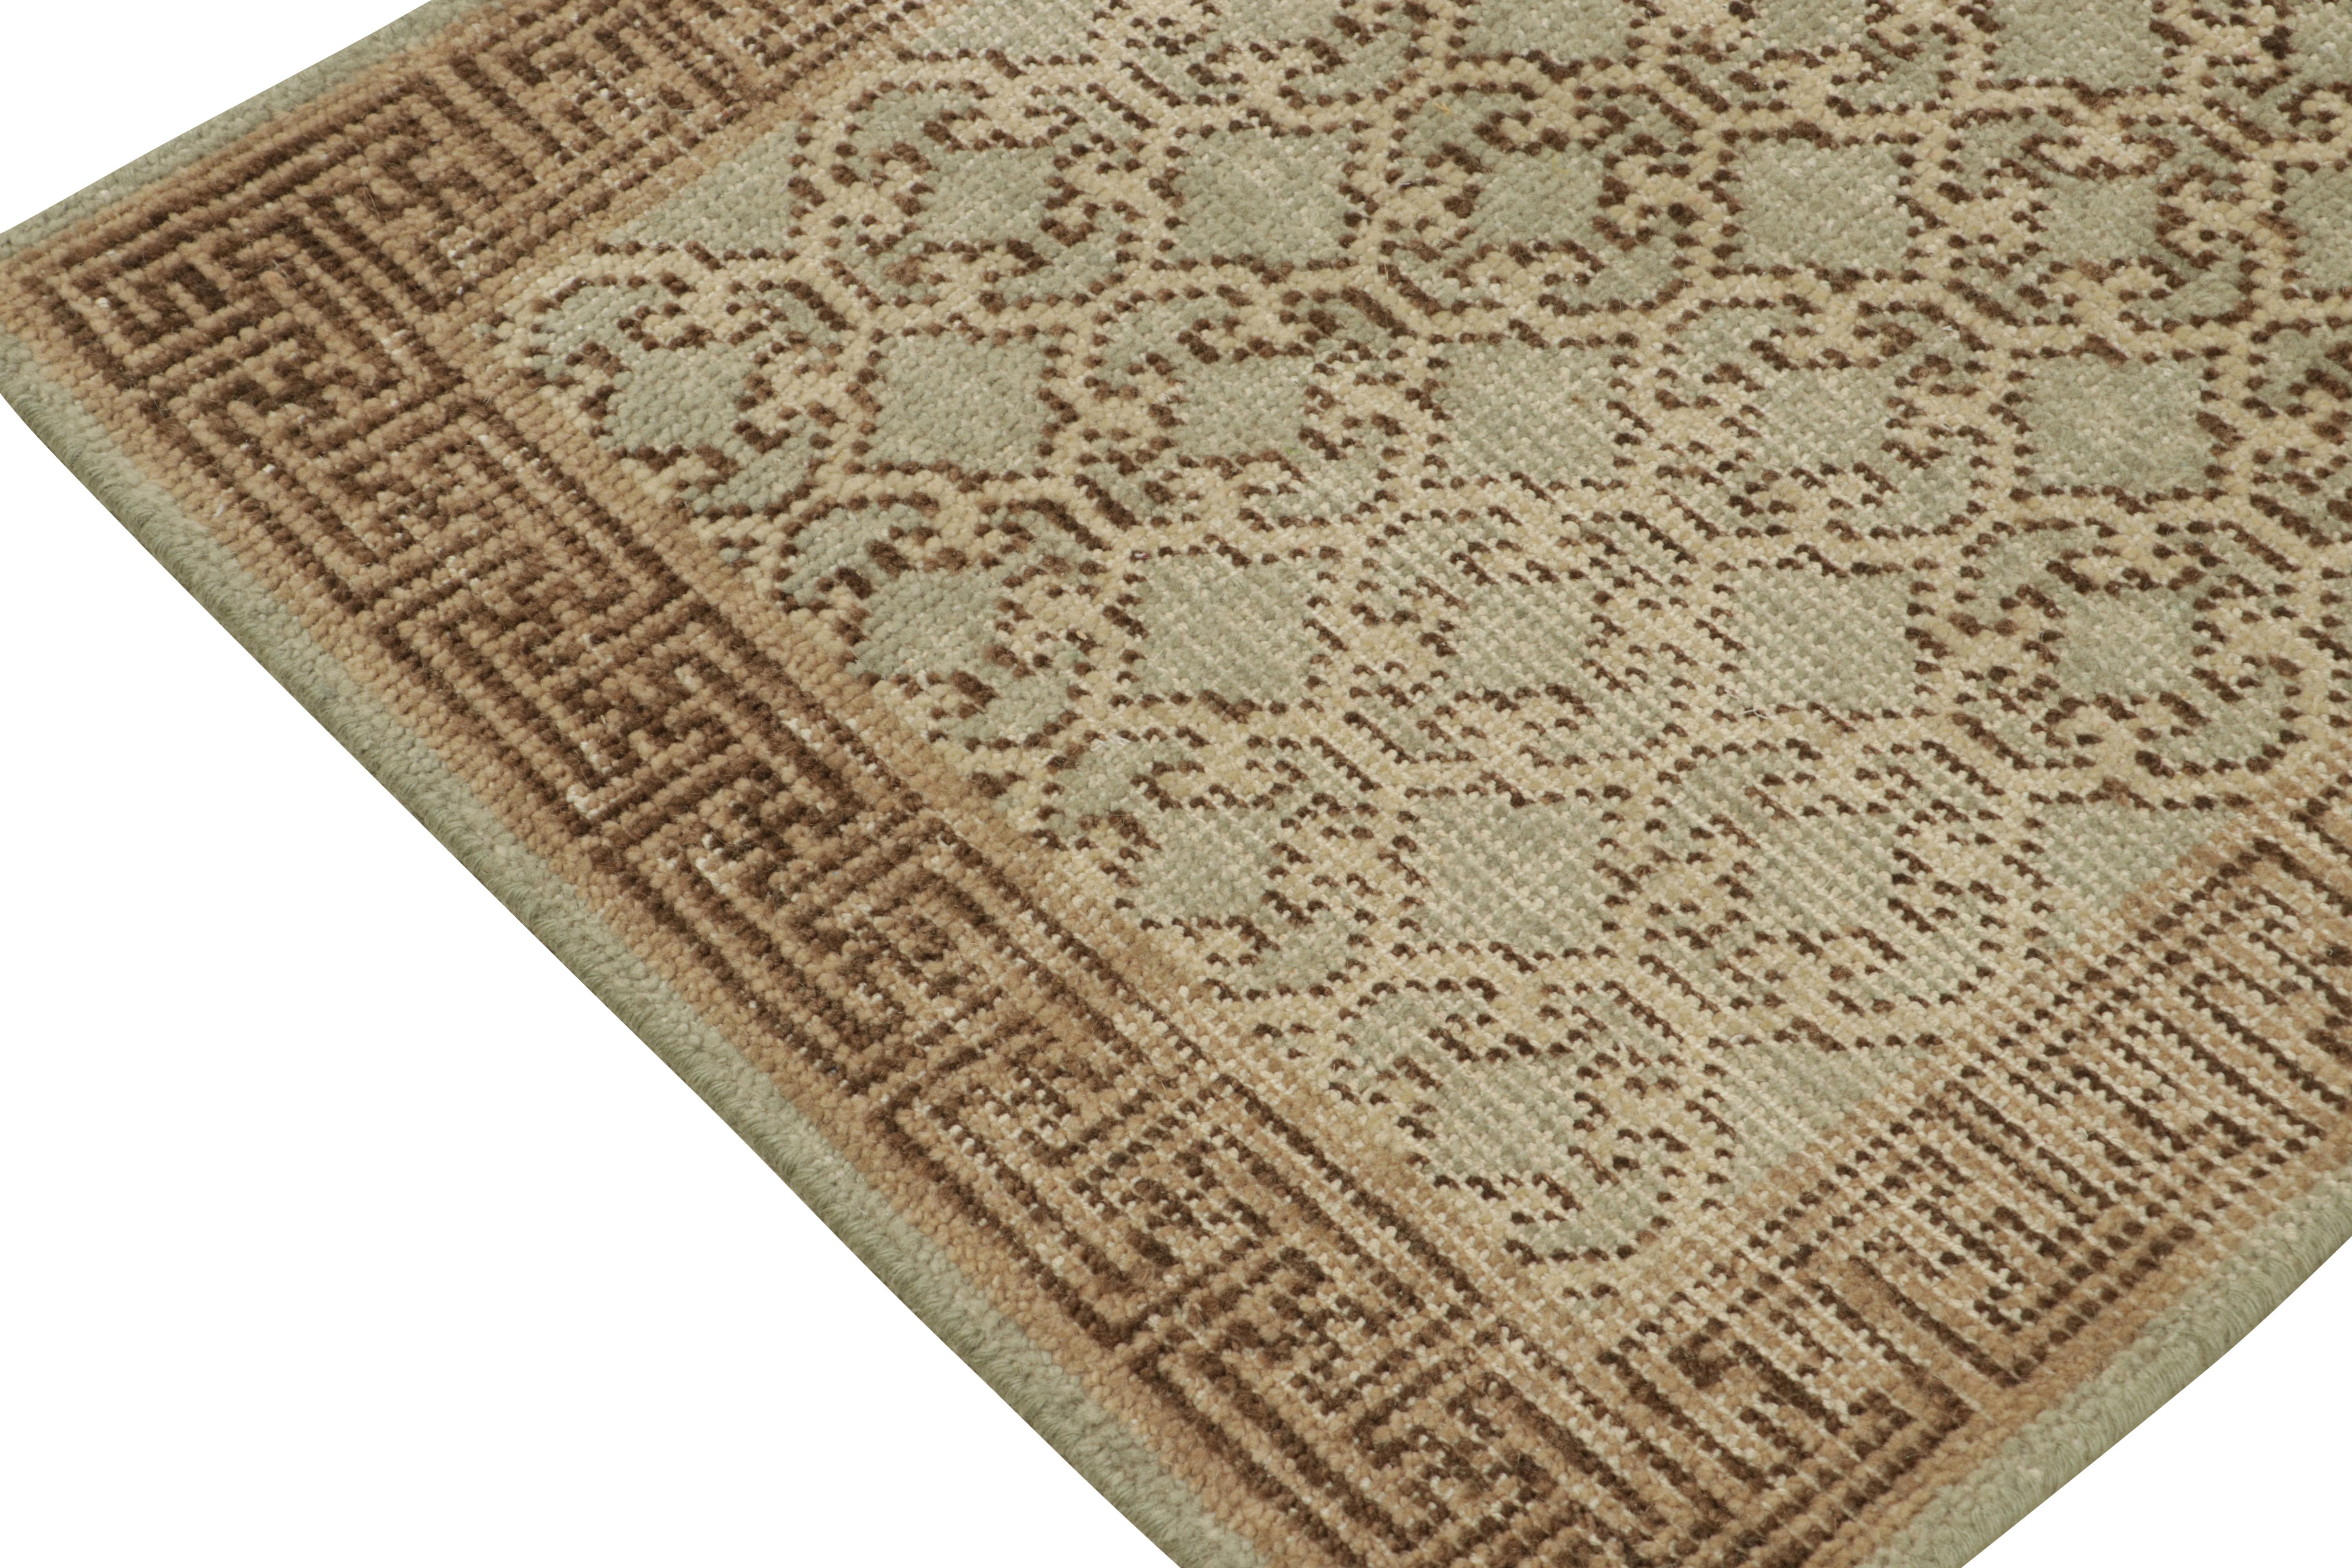 Rug & Kilim's Distressed Khotan Style Scatter Rug in Blue, Beige-Brown Pattern In New Condition For Sale In Long Island City, NY